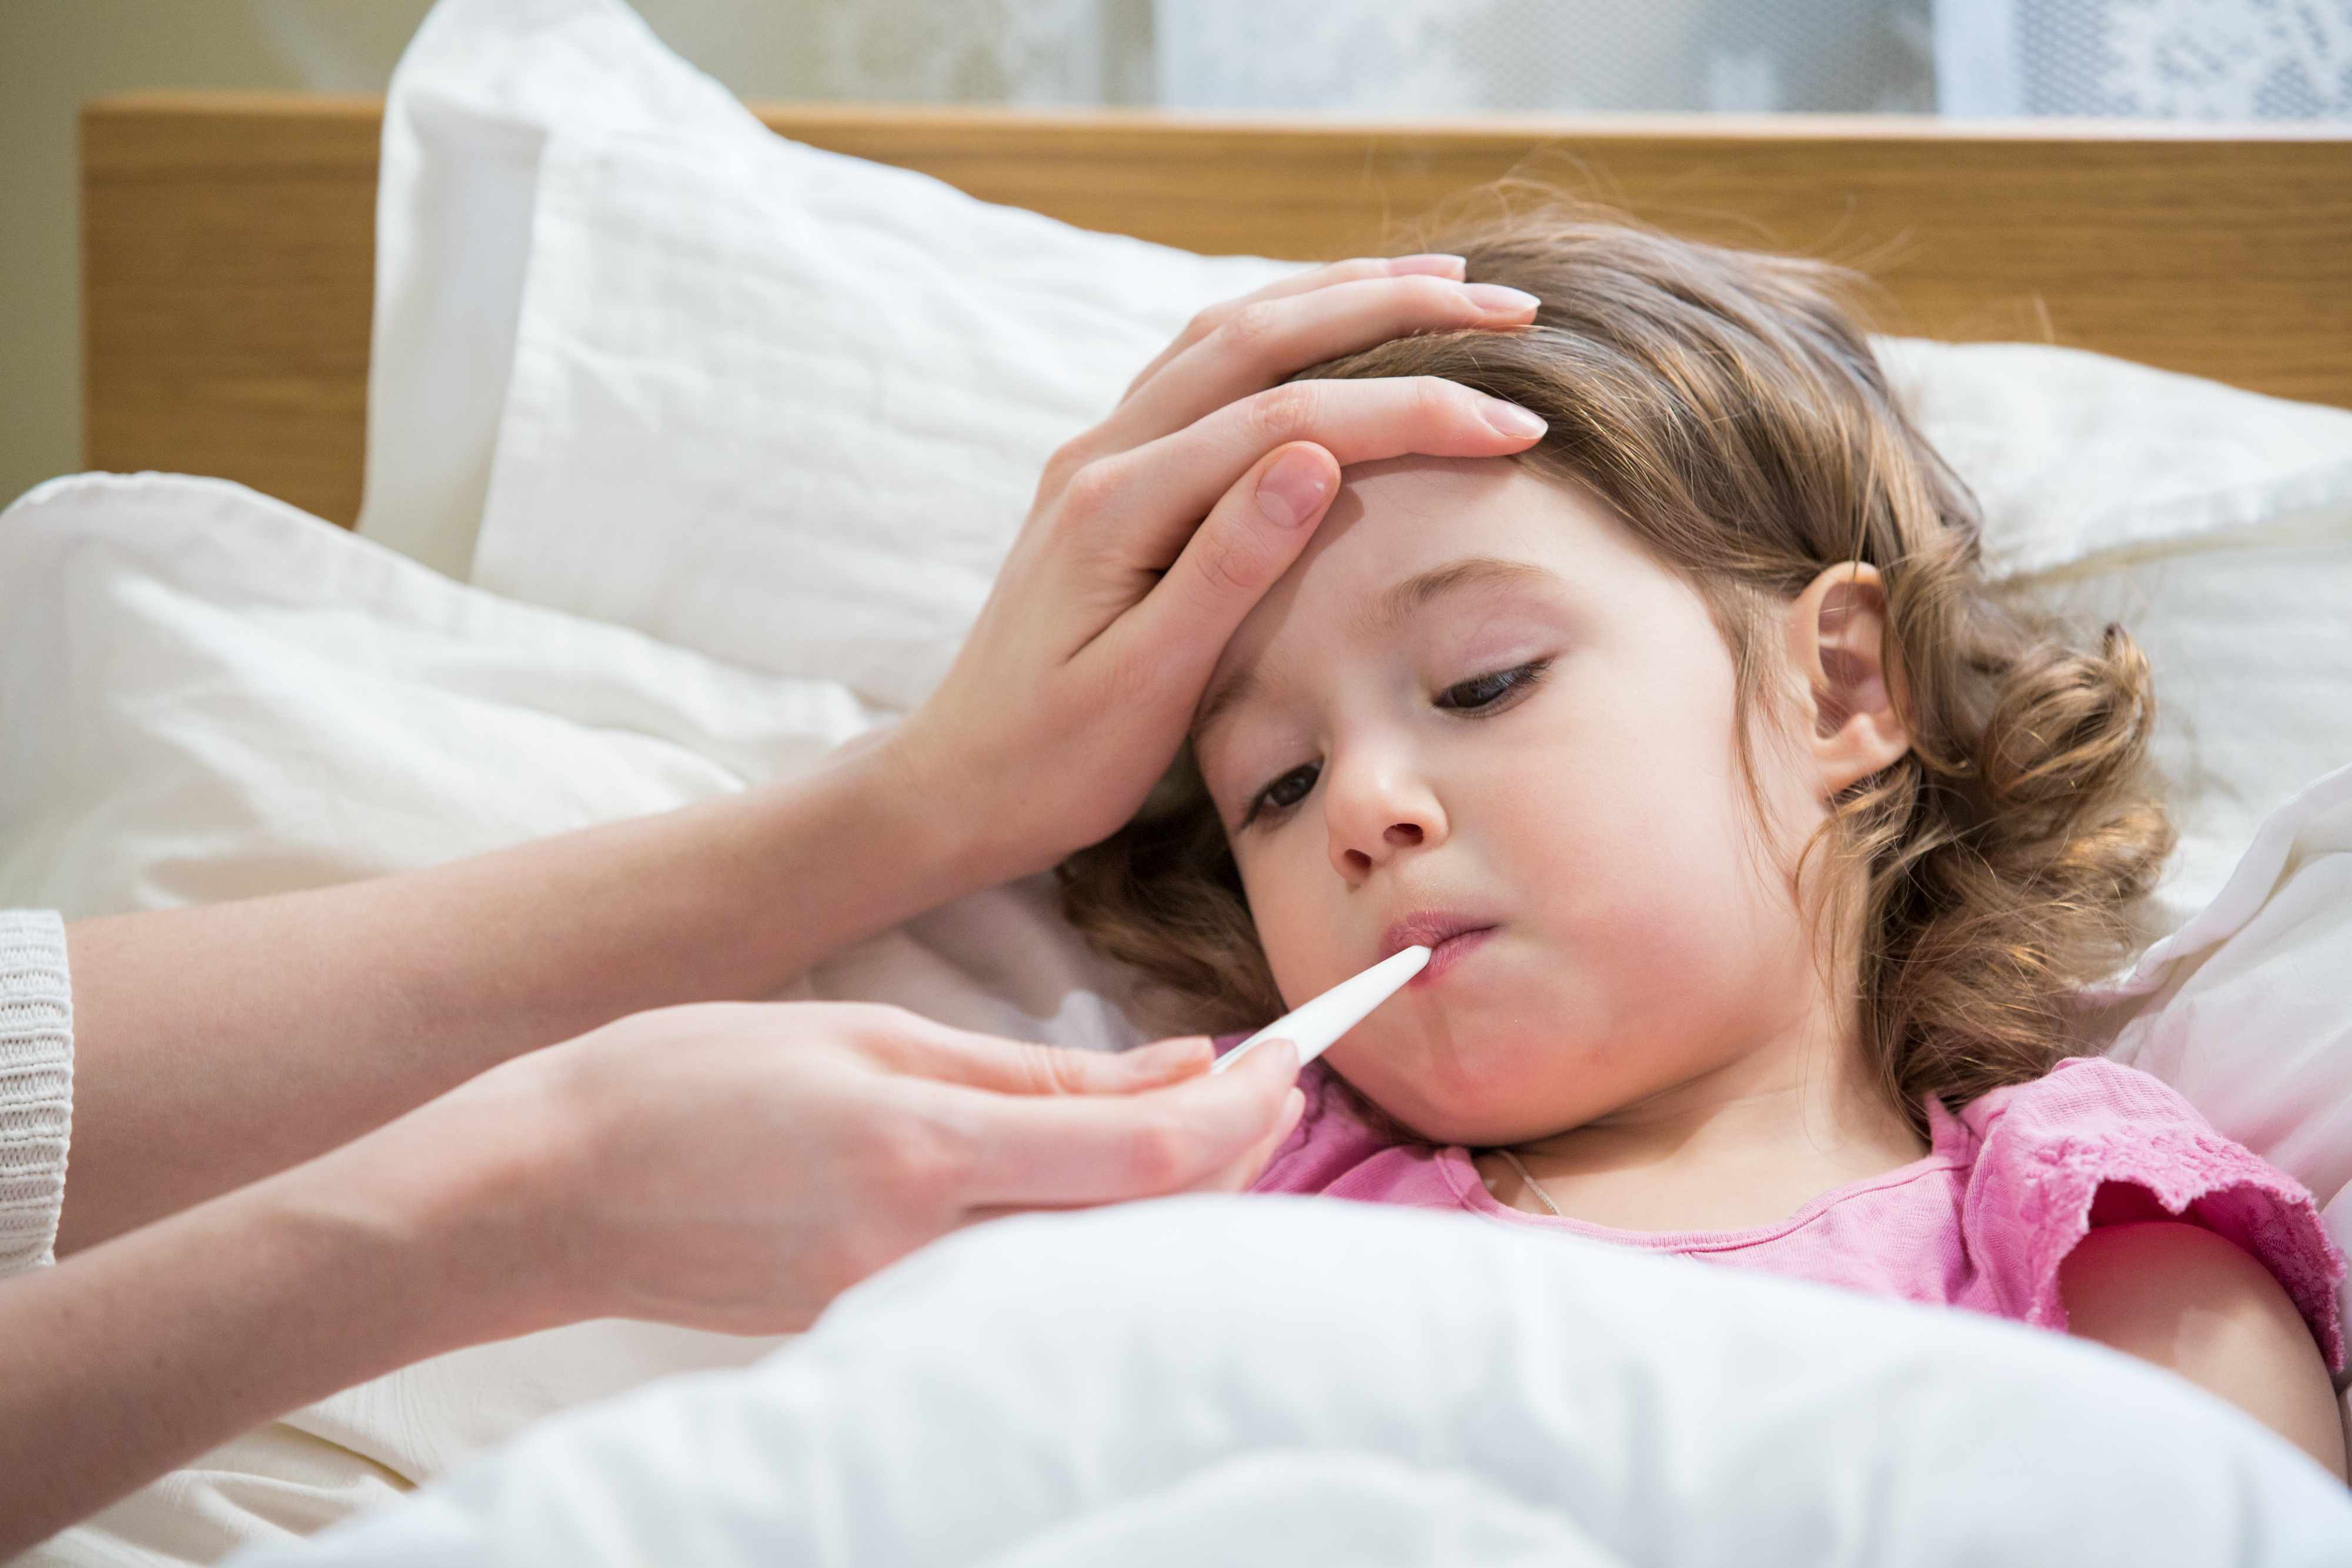 a sick child, a little girl in bed having her temperature taken with a thermometer